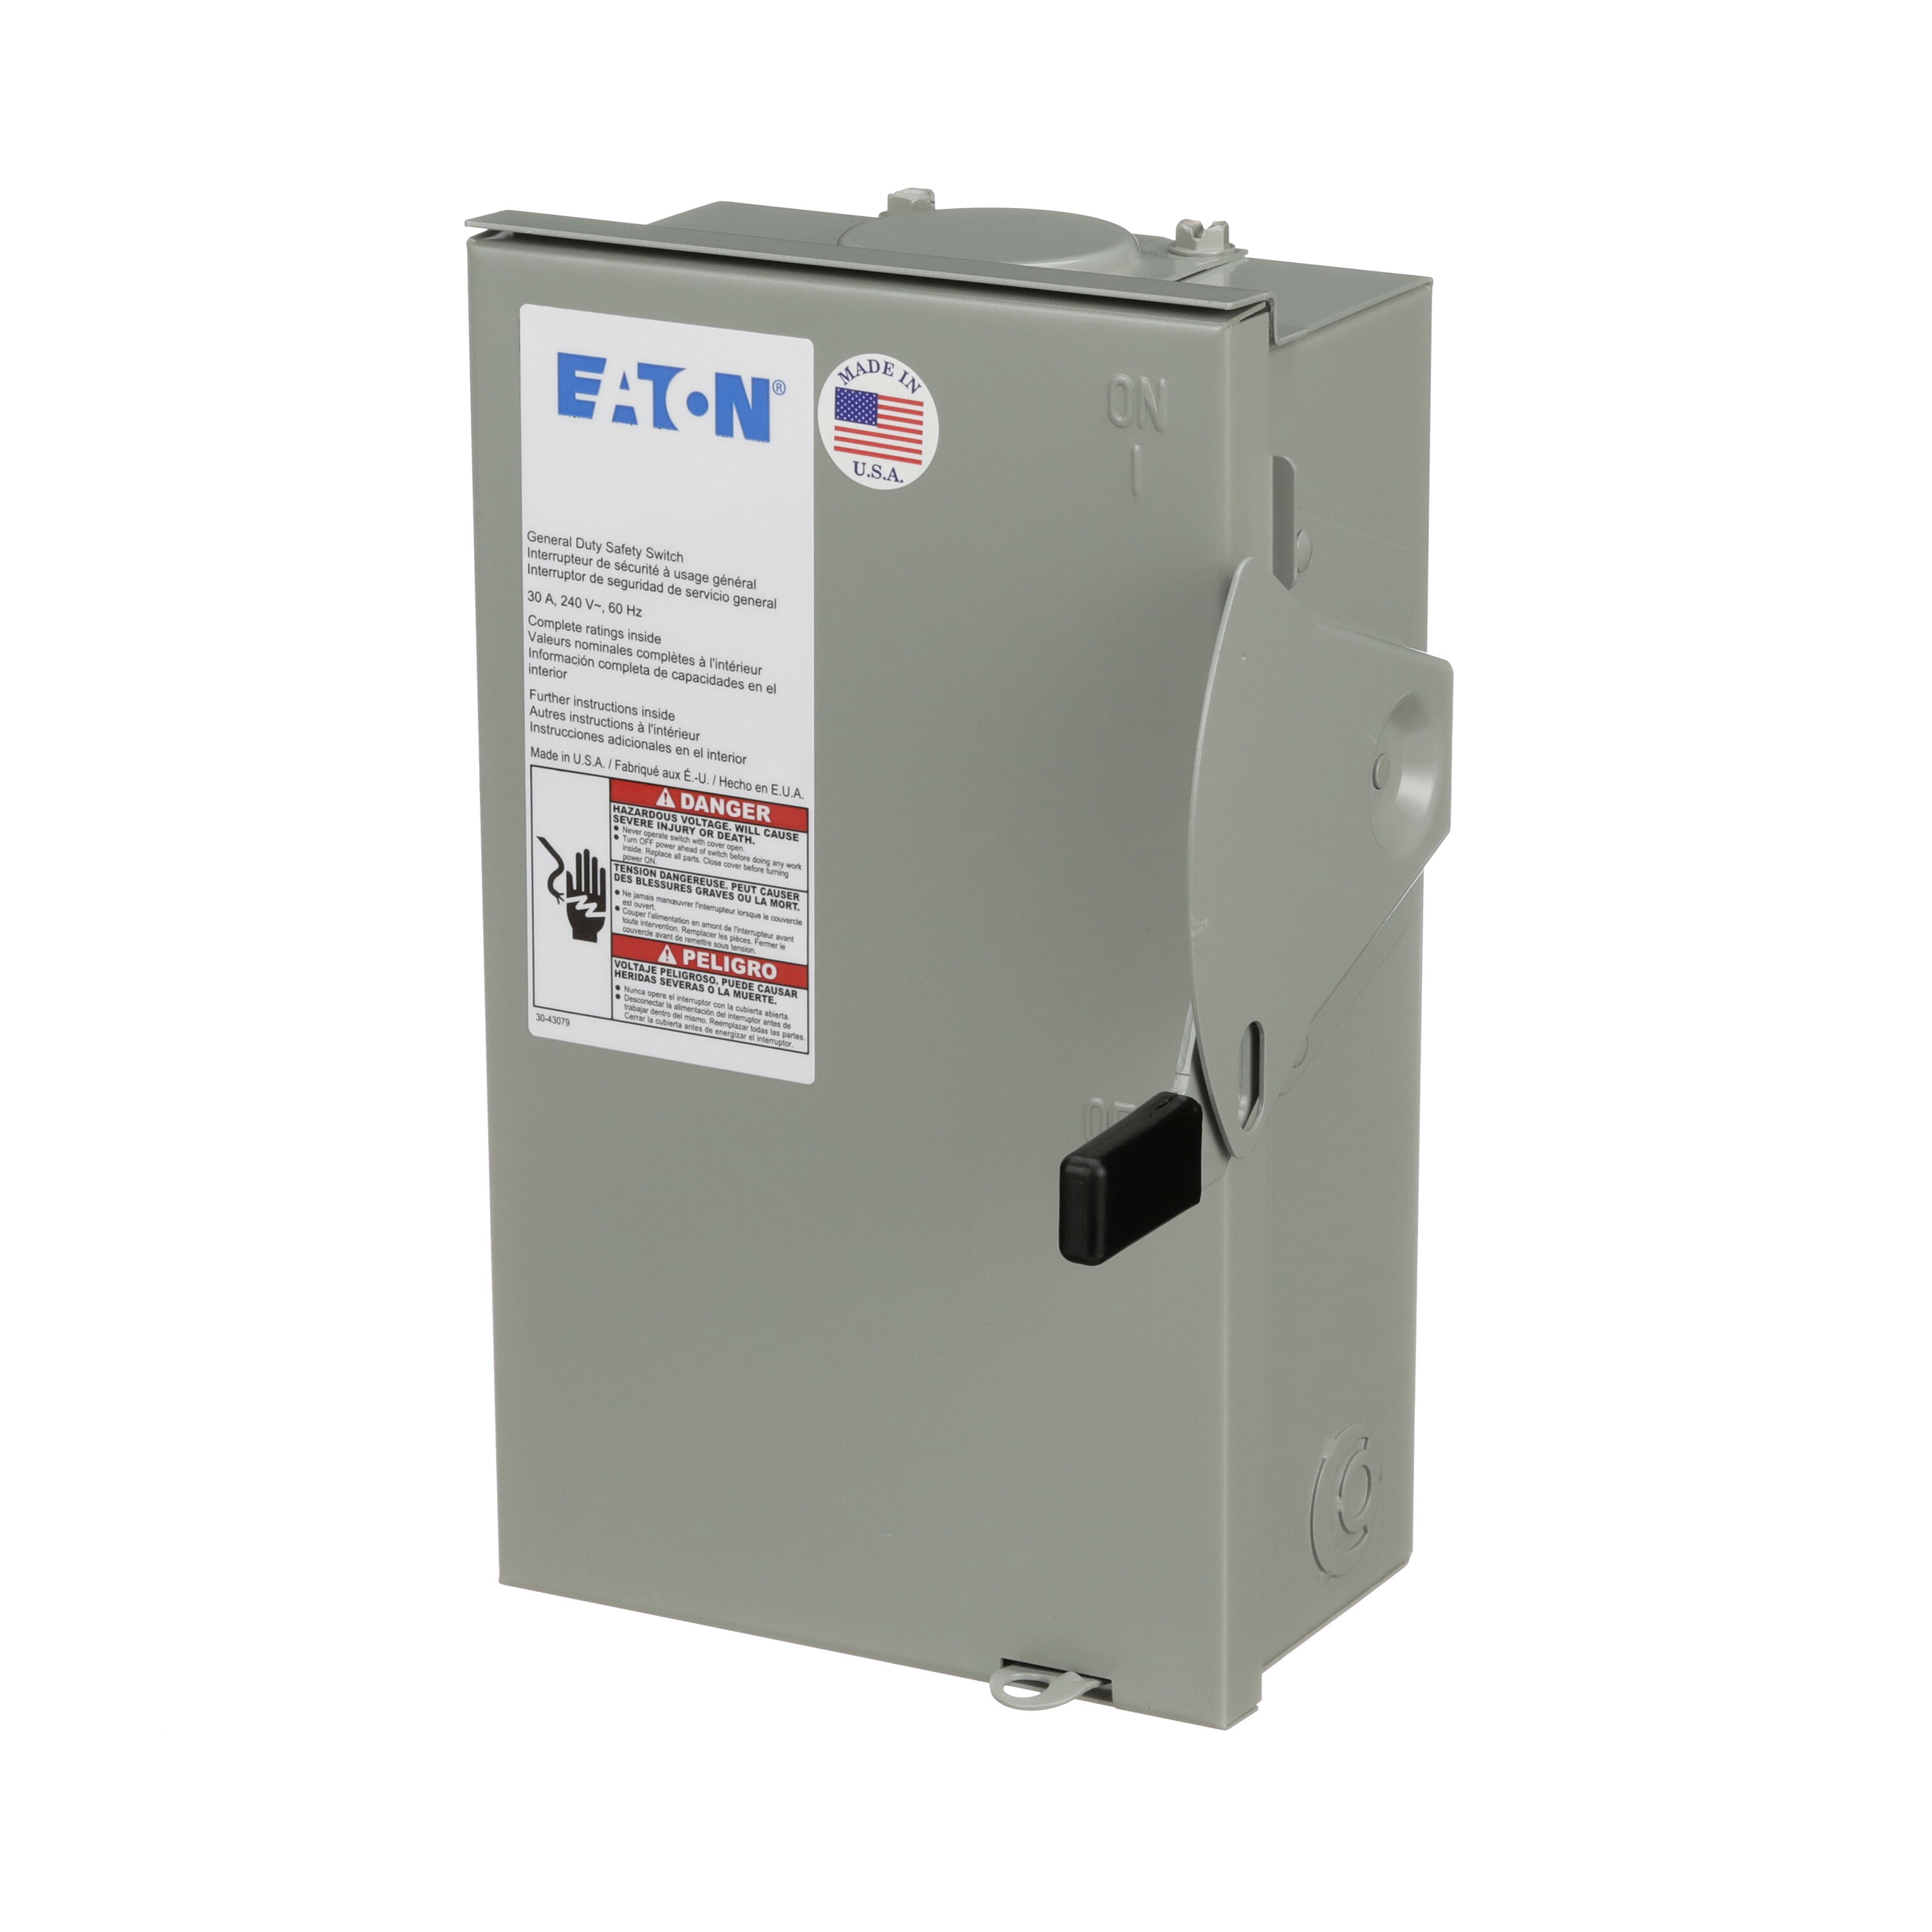 Eaton DG221NRB Safety Switch 2p 30a for sale online 